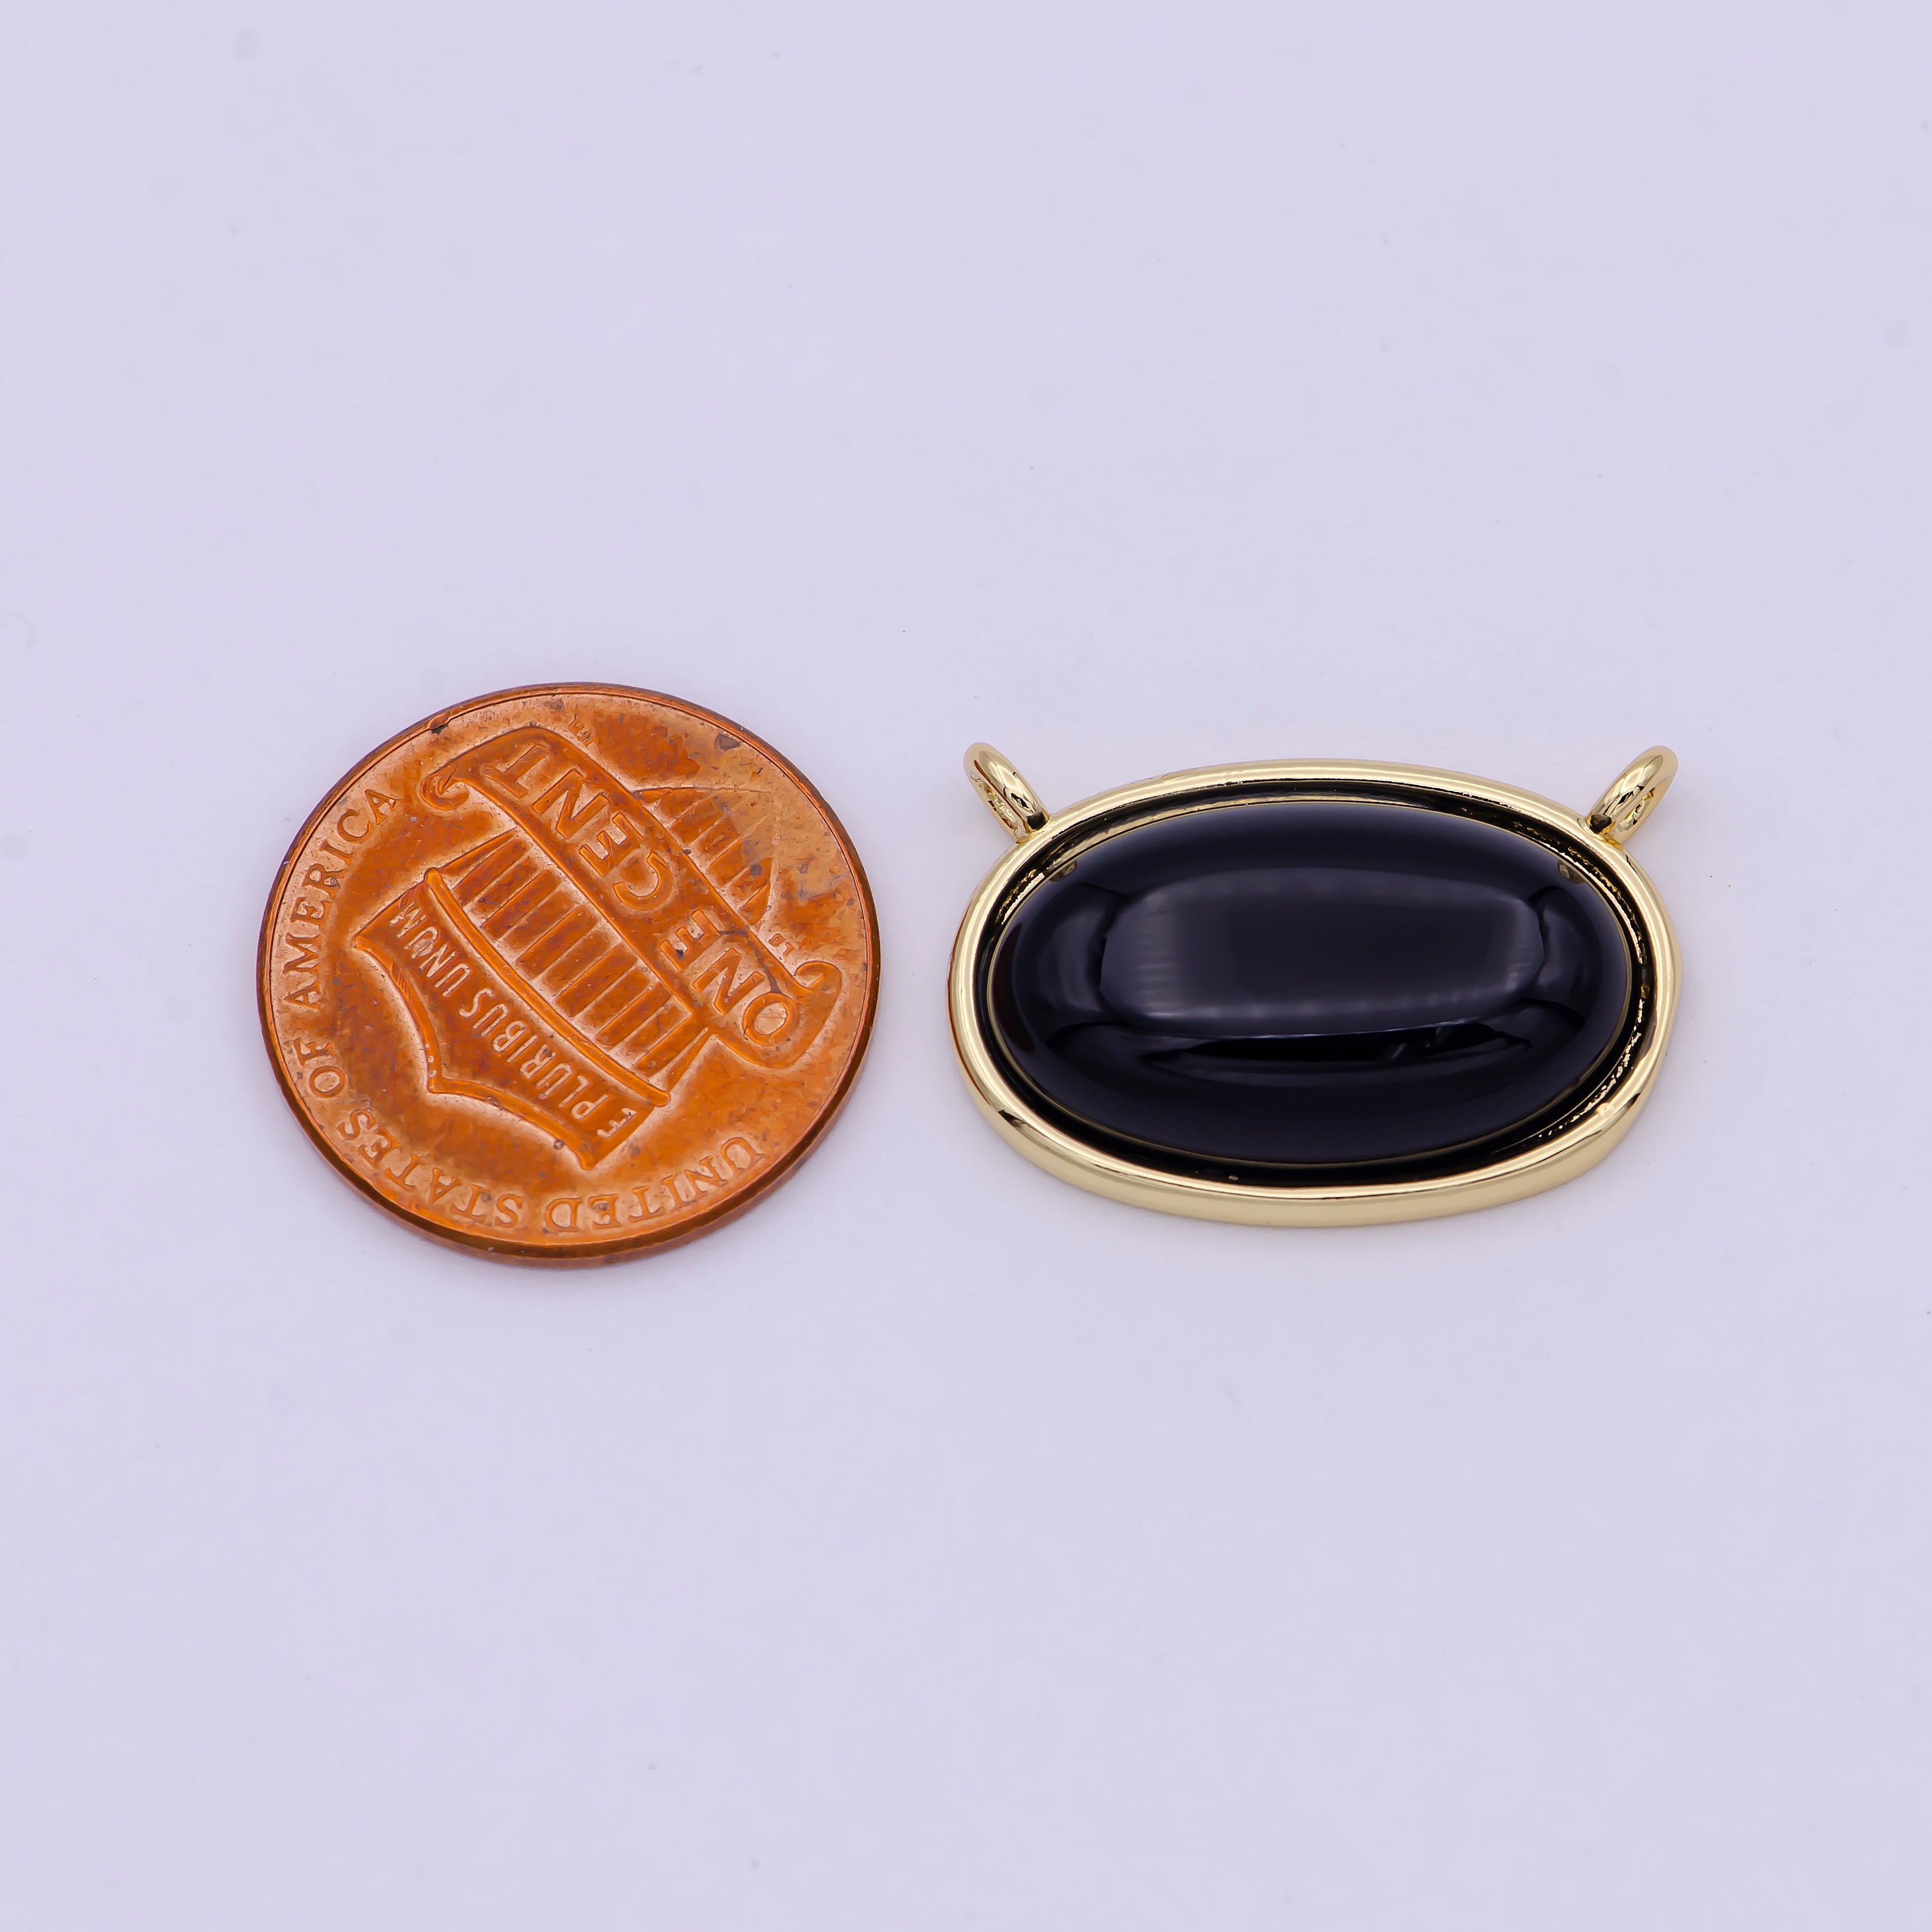 Black onyx Charm Connector Classic vintage Oval crystal protection gemstone stone pendant necklace jewelry for women N-112 - DLUXCA